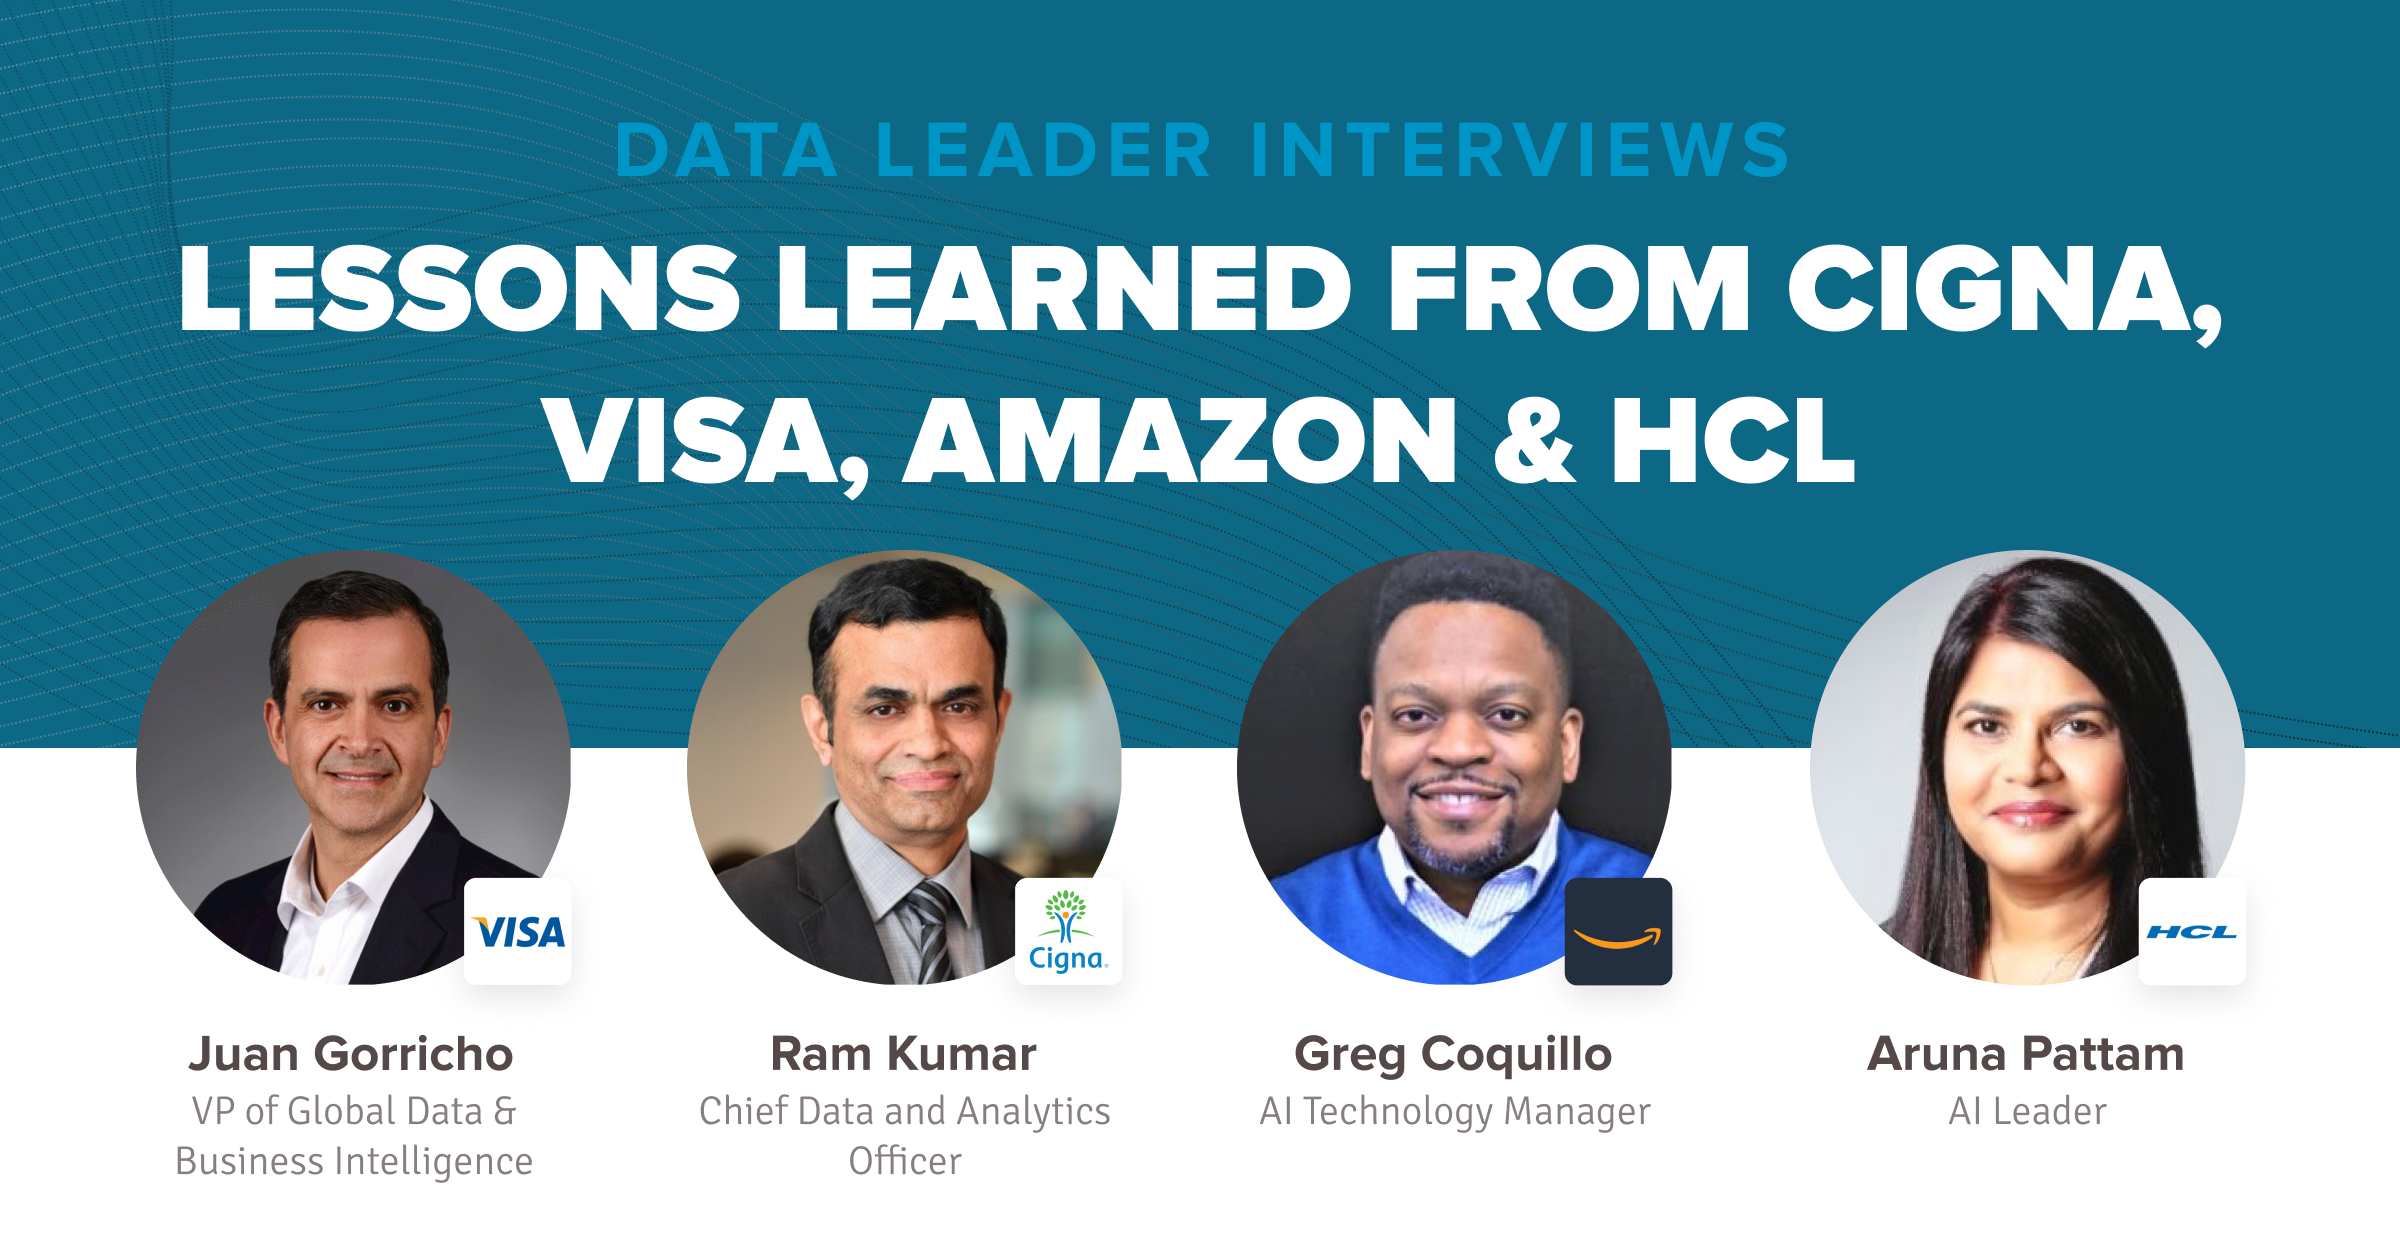 Lessons Learned from Cigna, Visa, Amazon & HCL